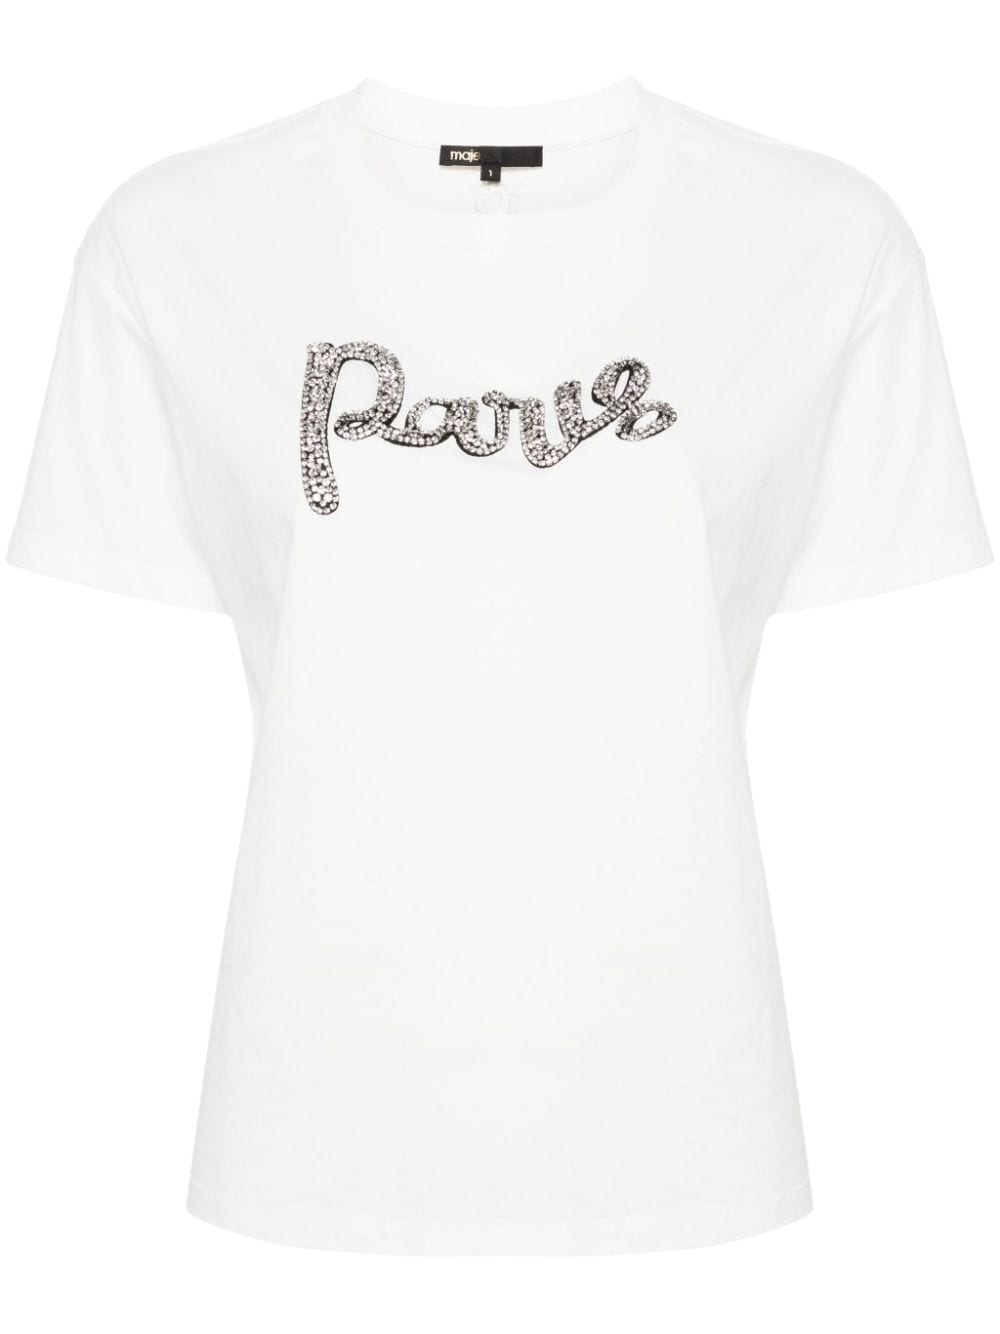 crystal-lettering cotton T-shirt